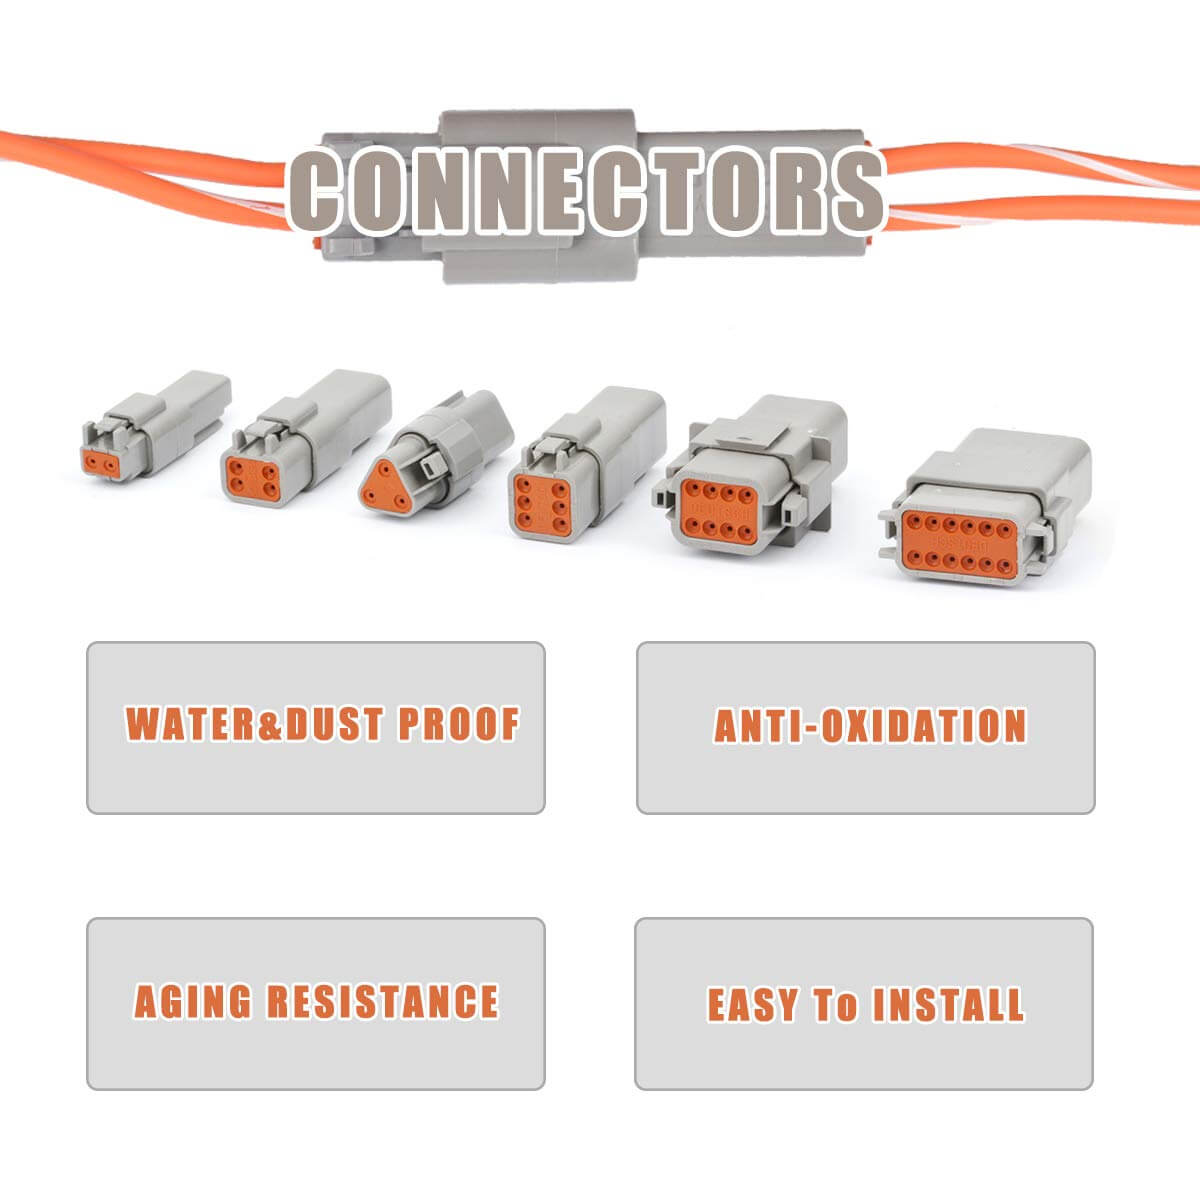 DT connector feature